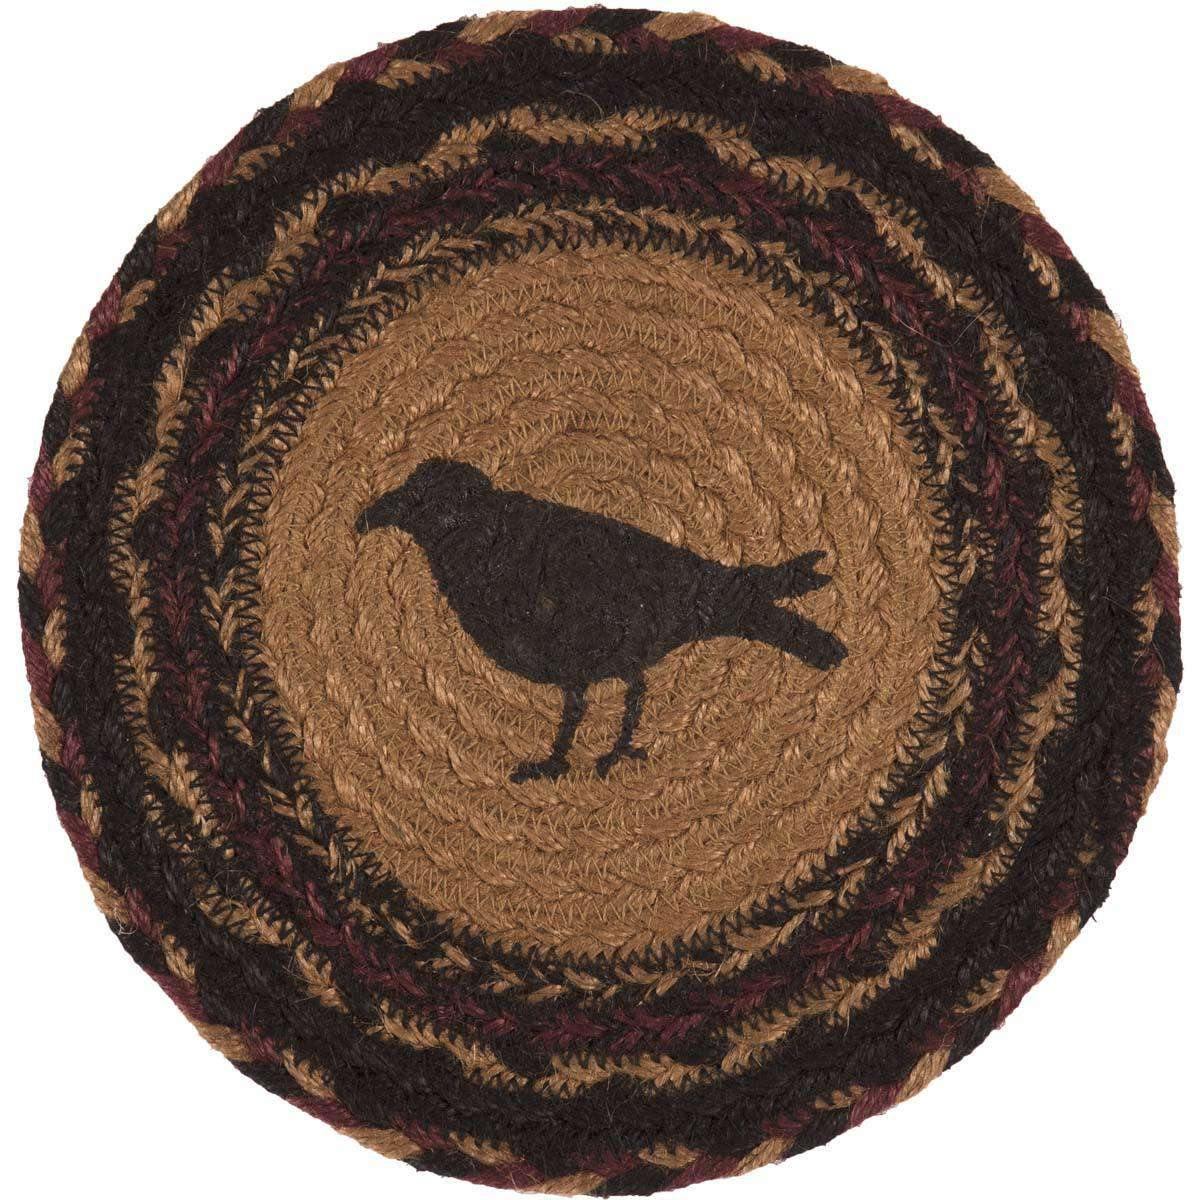 Heritage Farms Crow Braided Jute Trivet 8" VHC Brands front